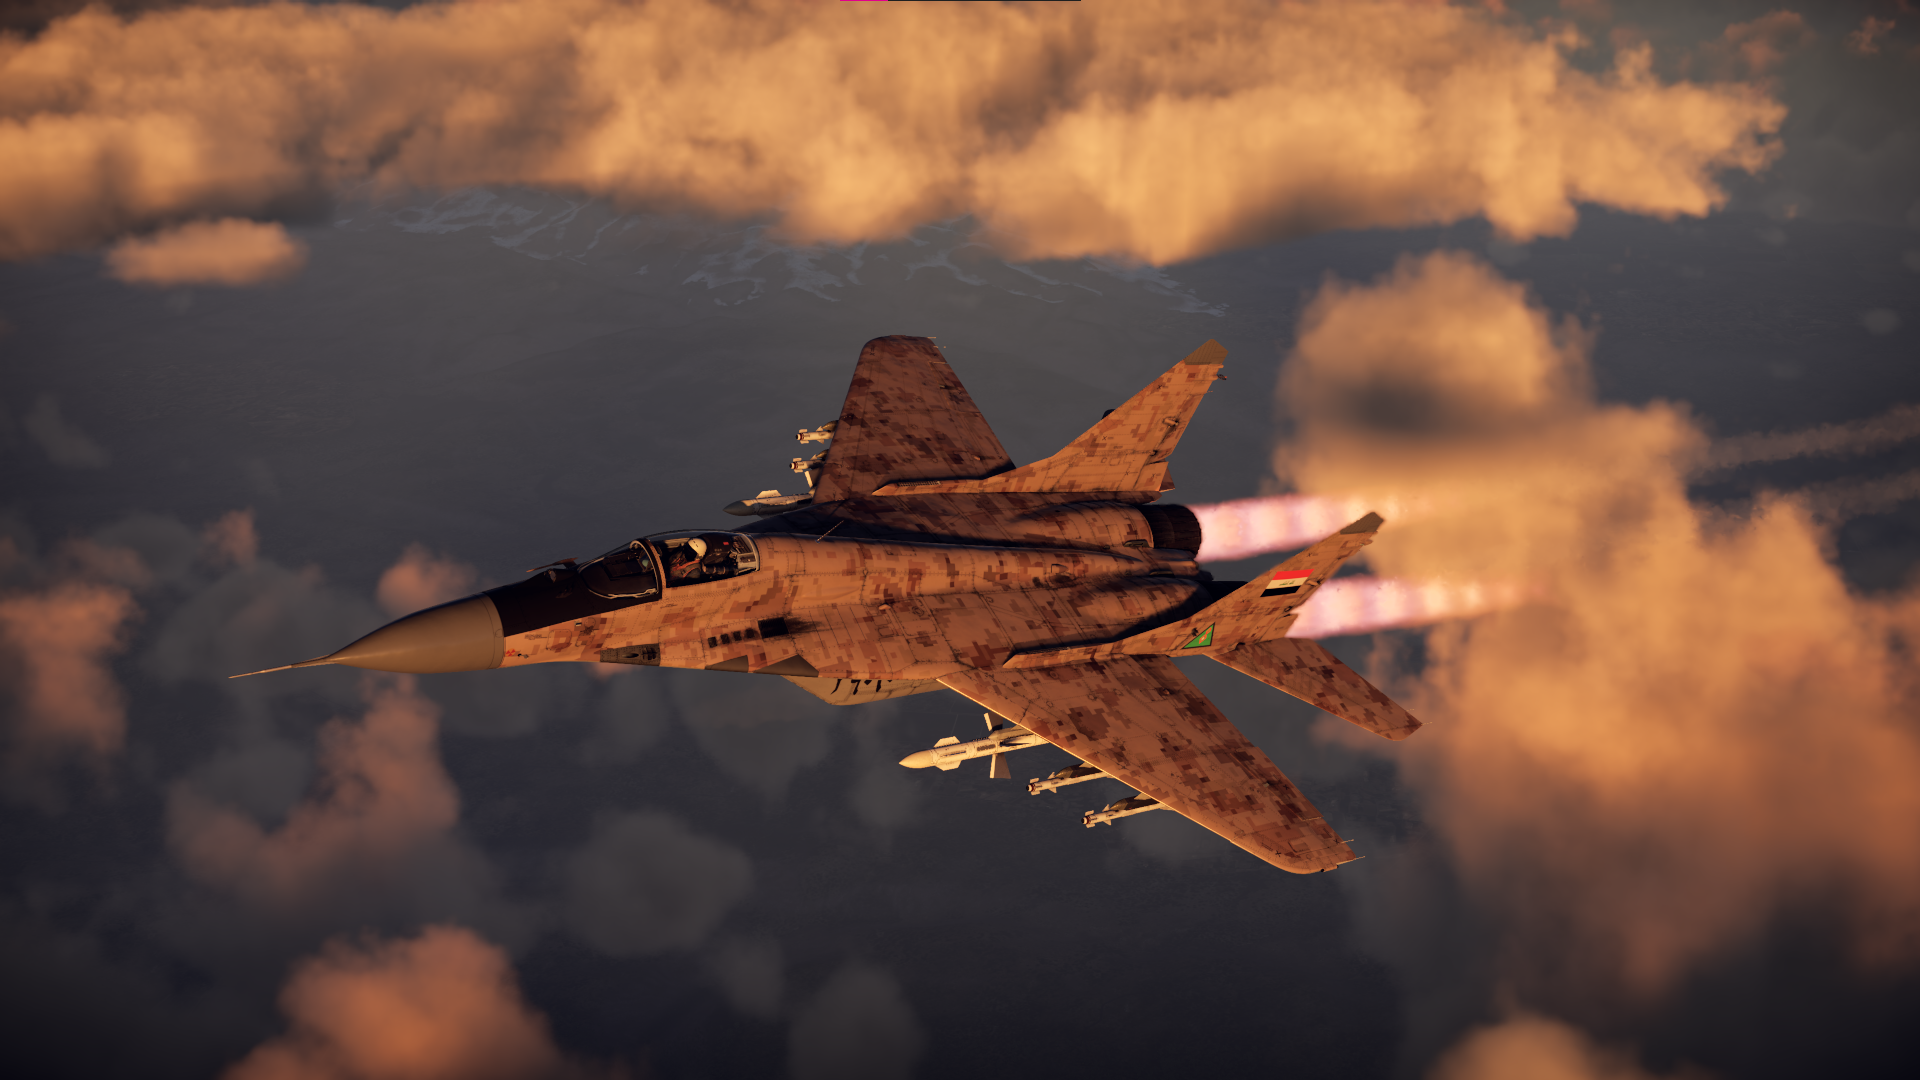 Jet Fighter Airplane Iraqi Air Force Mig29 War Thunder Military 1920x1080